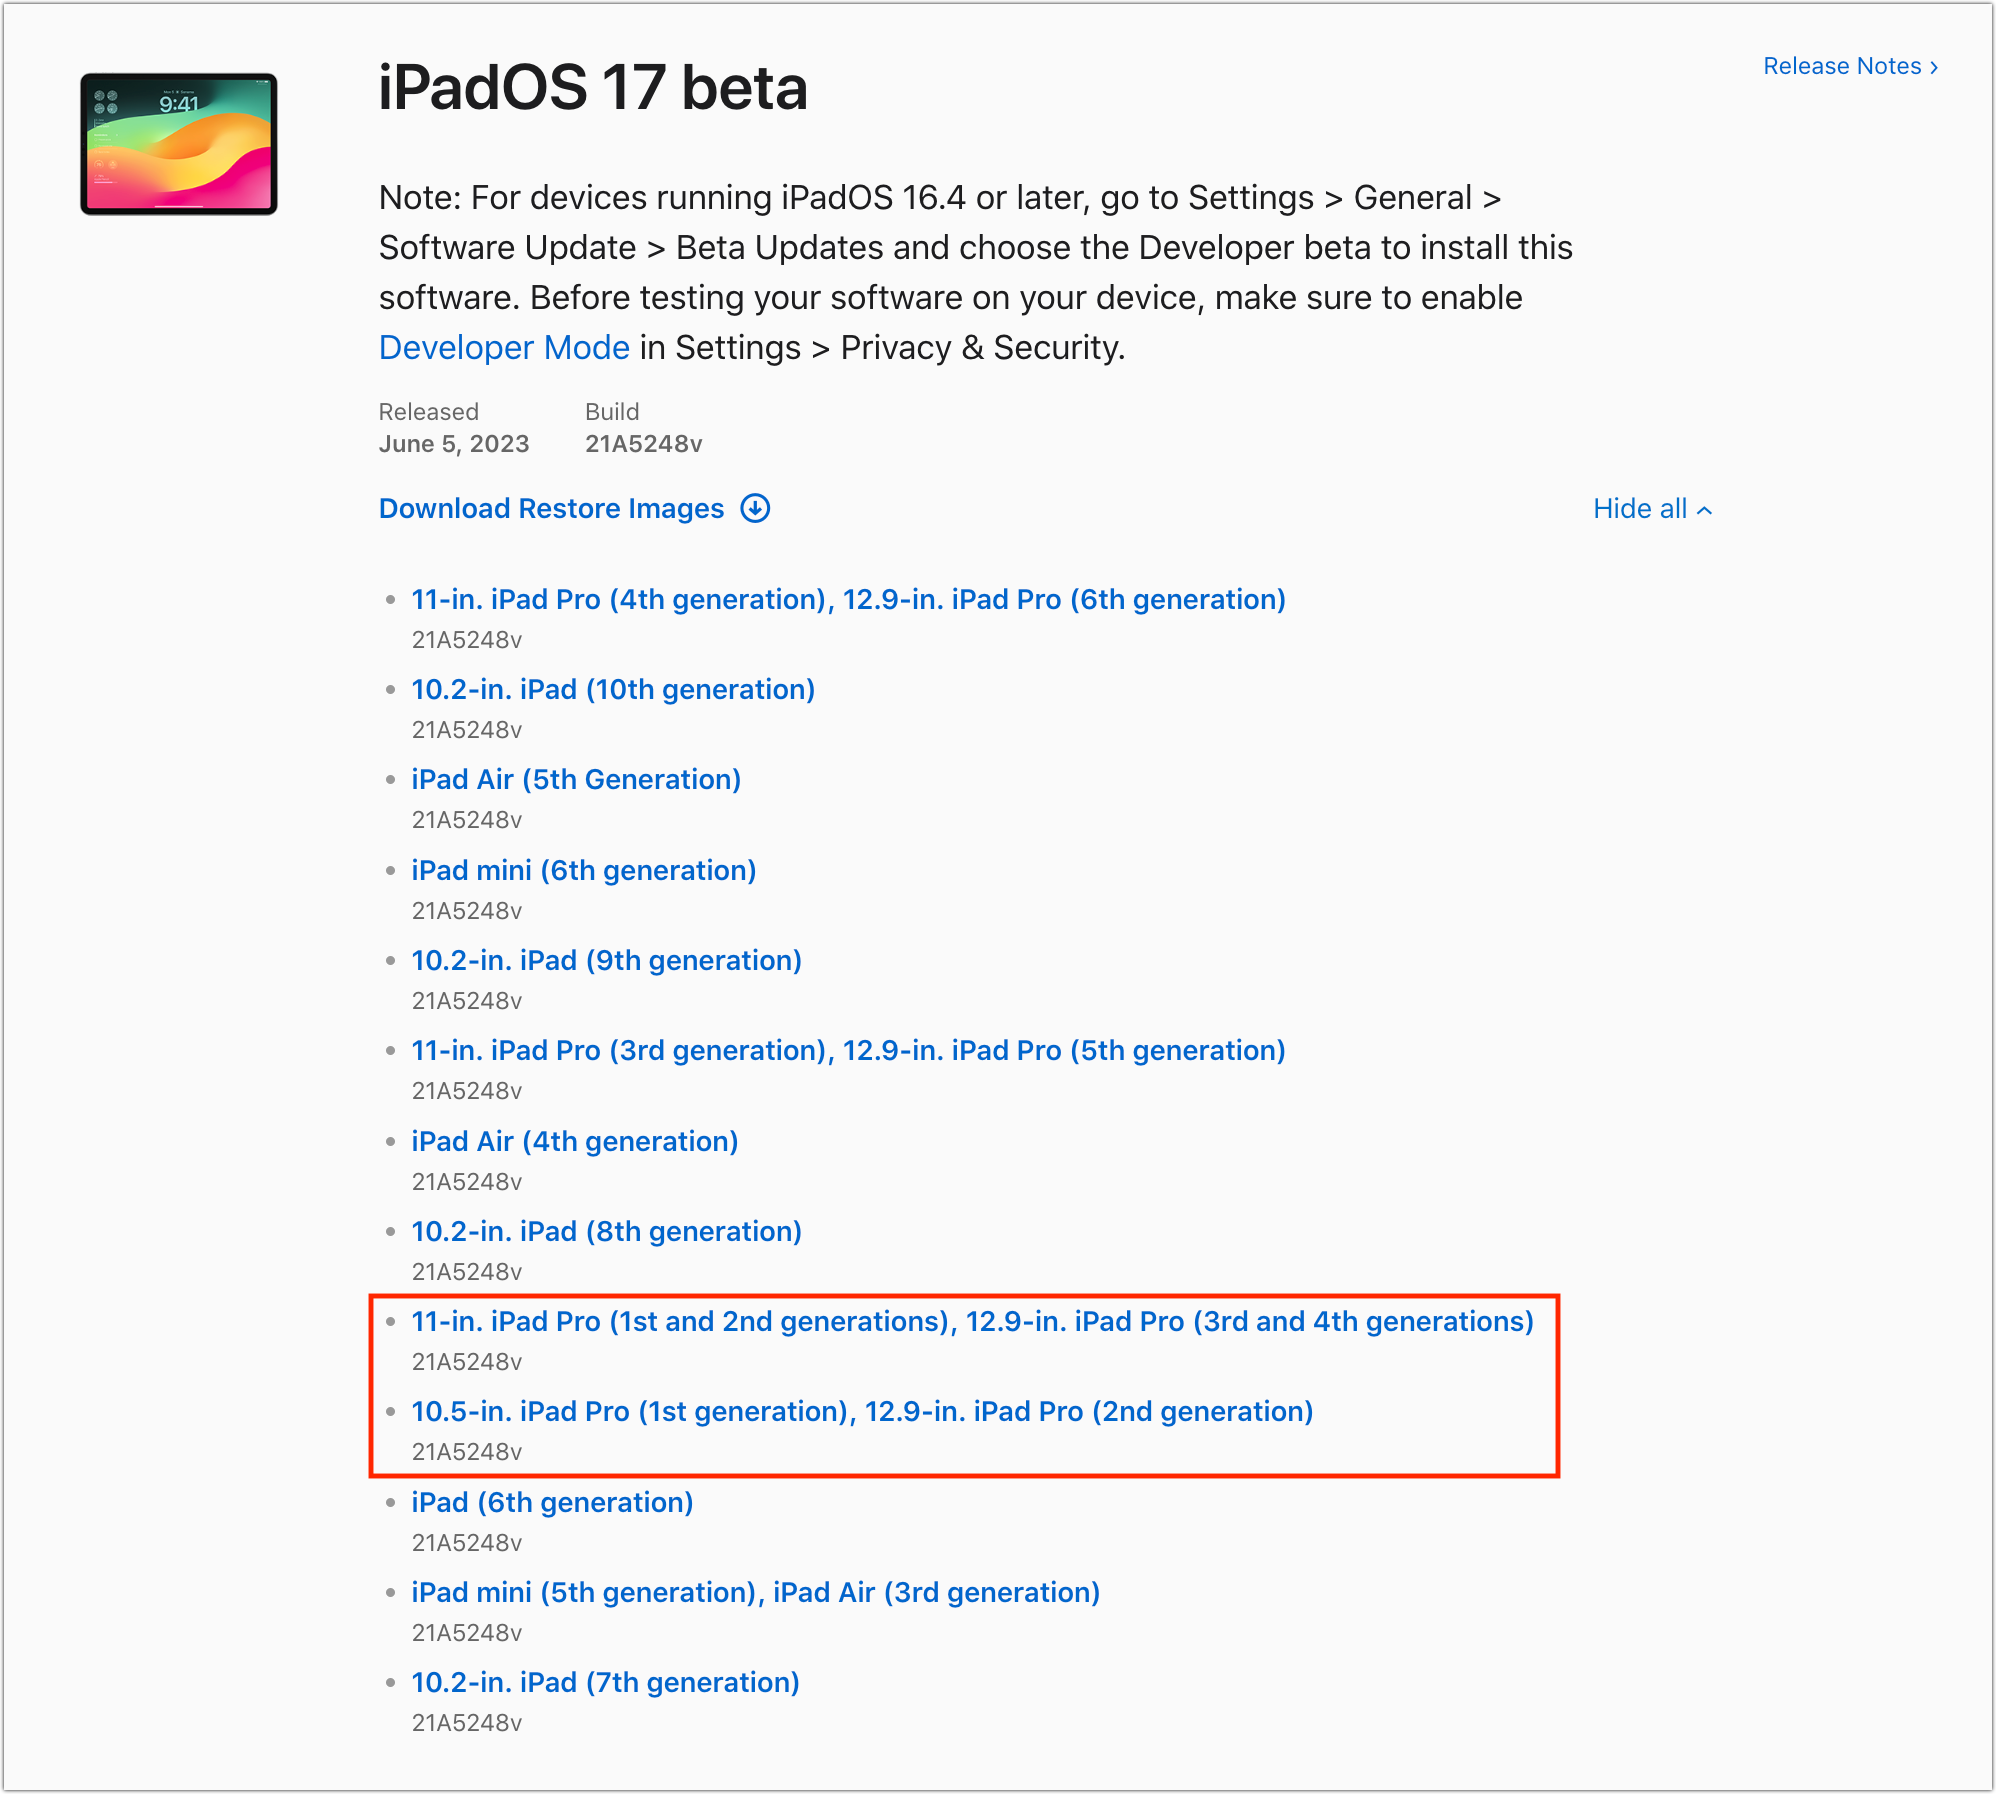 Proof of older iPad Pro models being supported in iPadOS 17